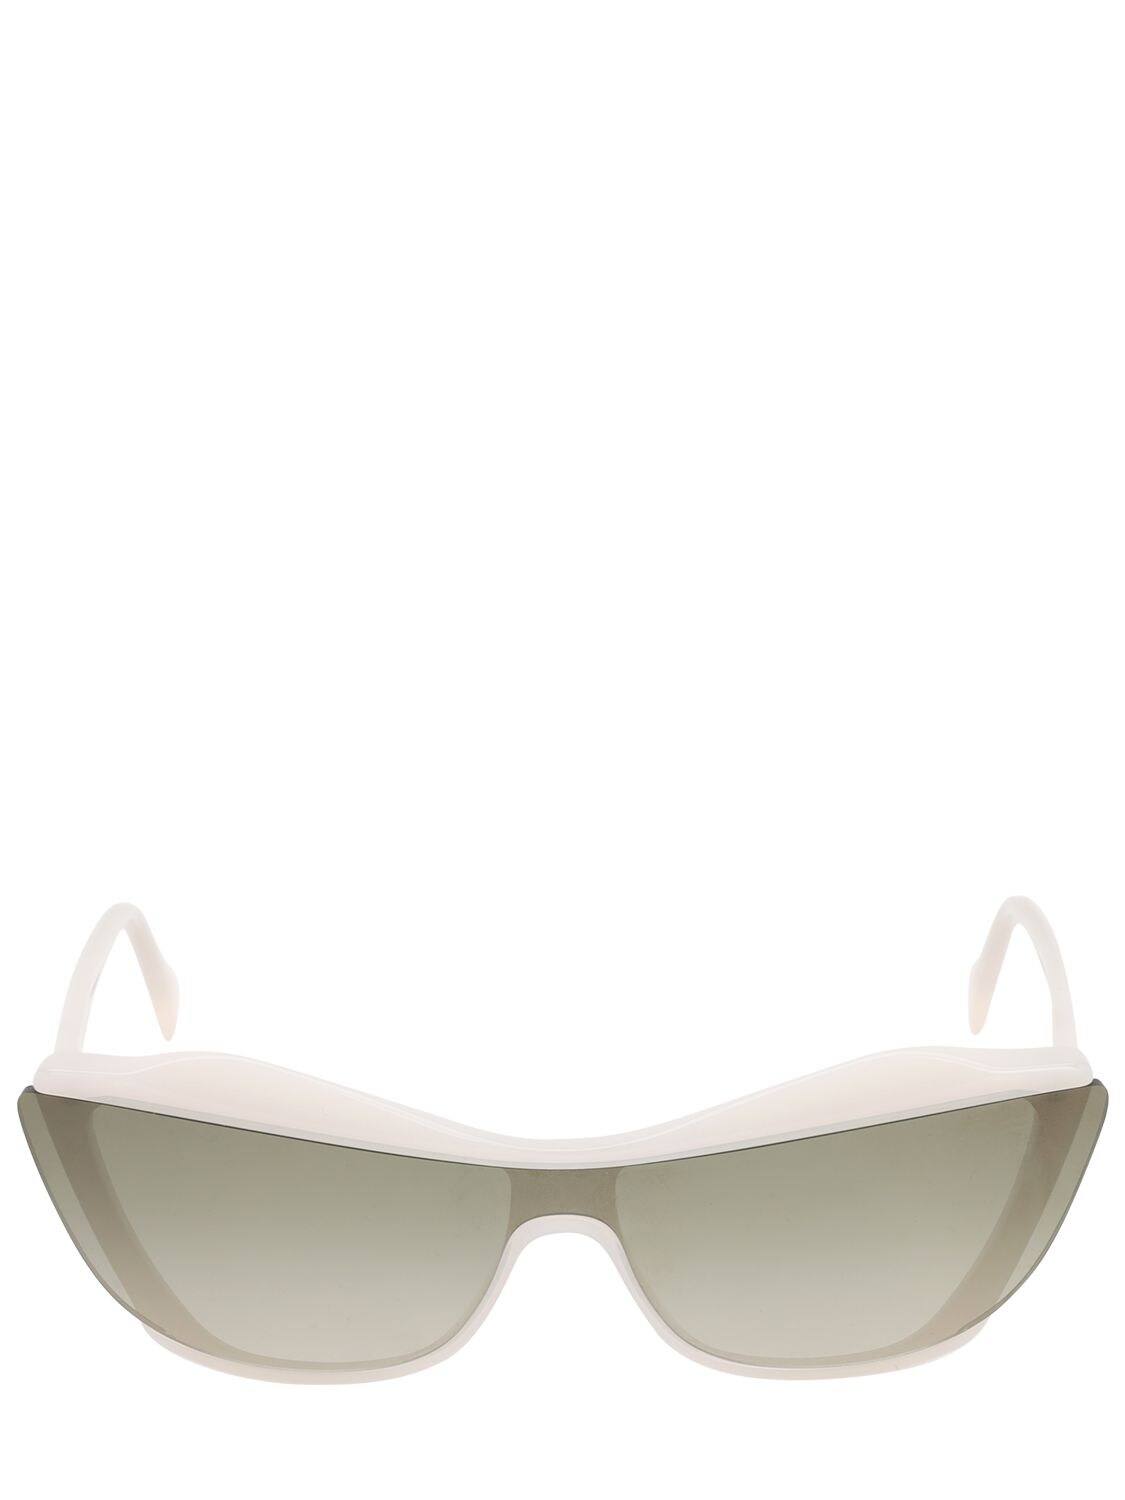 Andy Wolf Gretl Cat-eye Acetate Sunglasses In White,grey